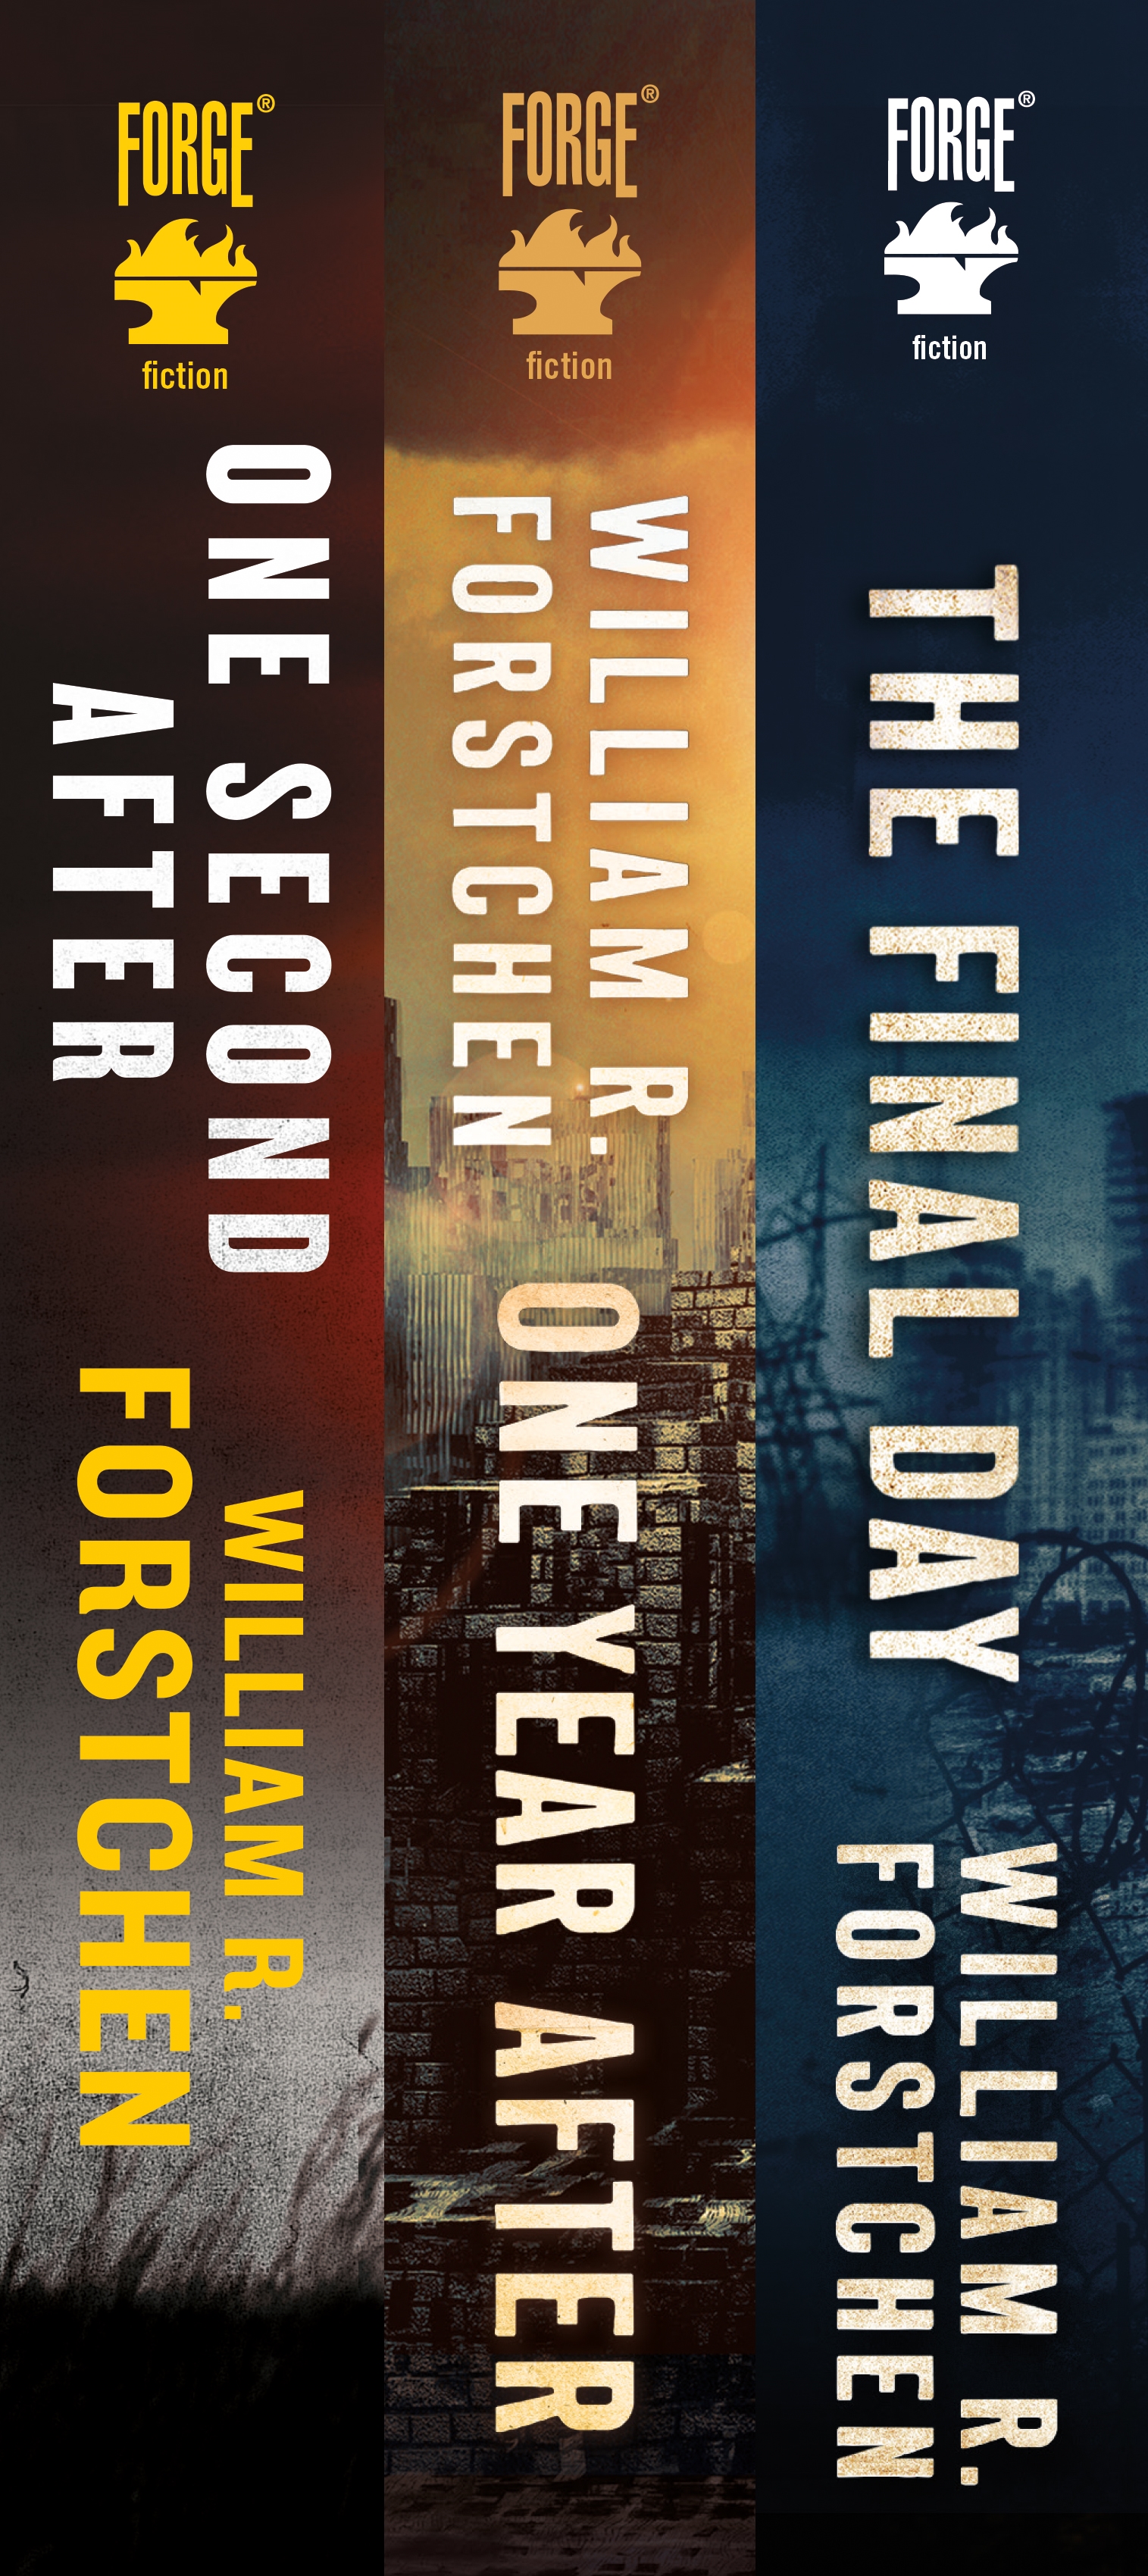 The John Matherson Series : (One Second After, One Year After, The Final Day) by William R. Forstchen